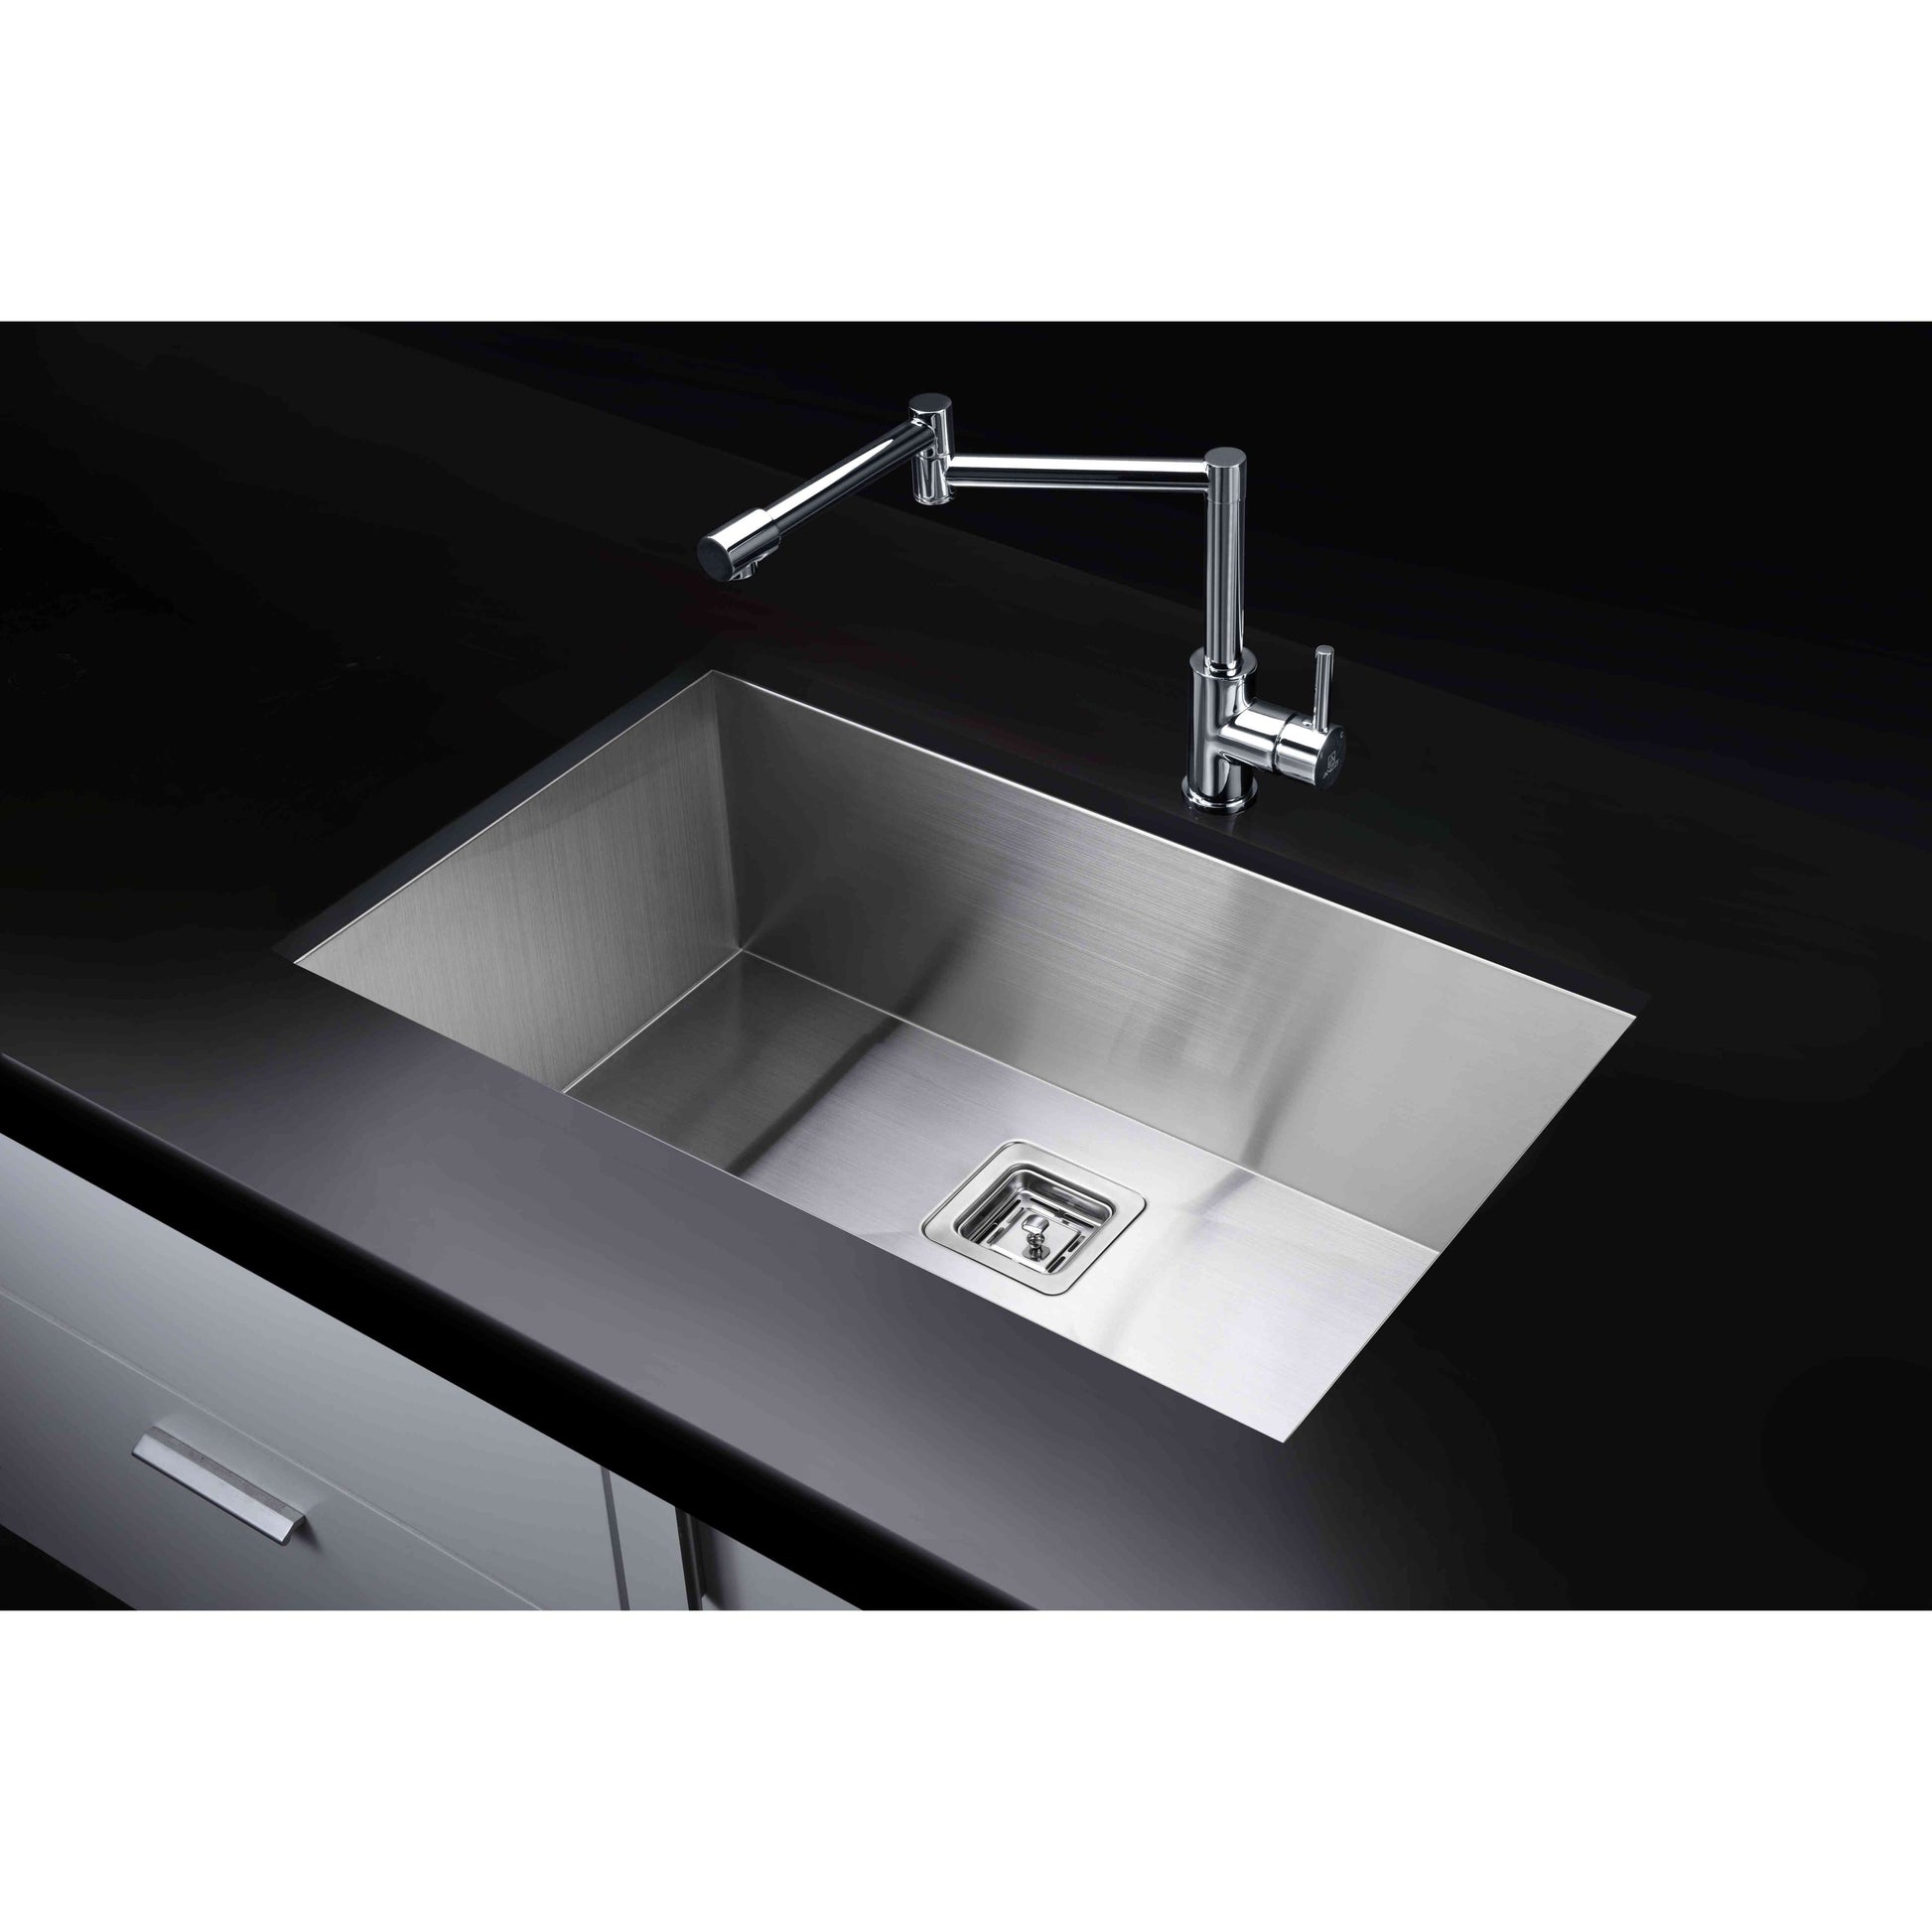 ANZZI Vanguard Series 30" Single Bowl Stainless Steel Brushed Satin Undermount Kitchen Sink With Strainer and Drain Assembly